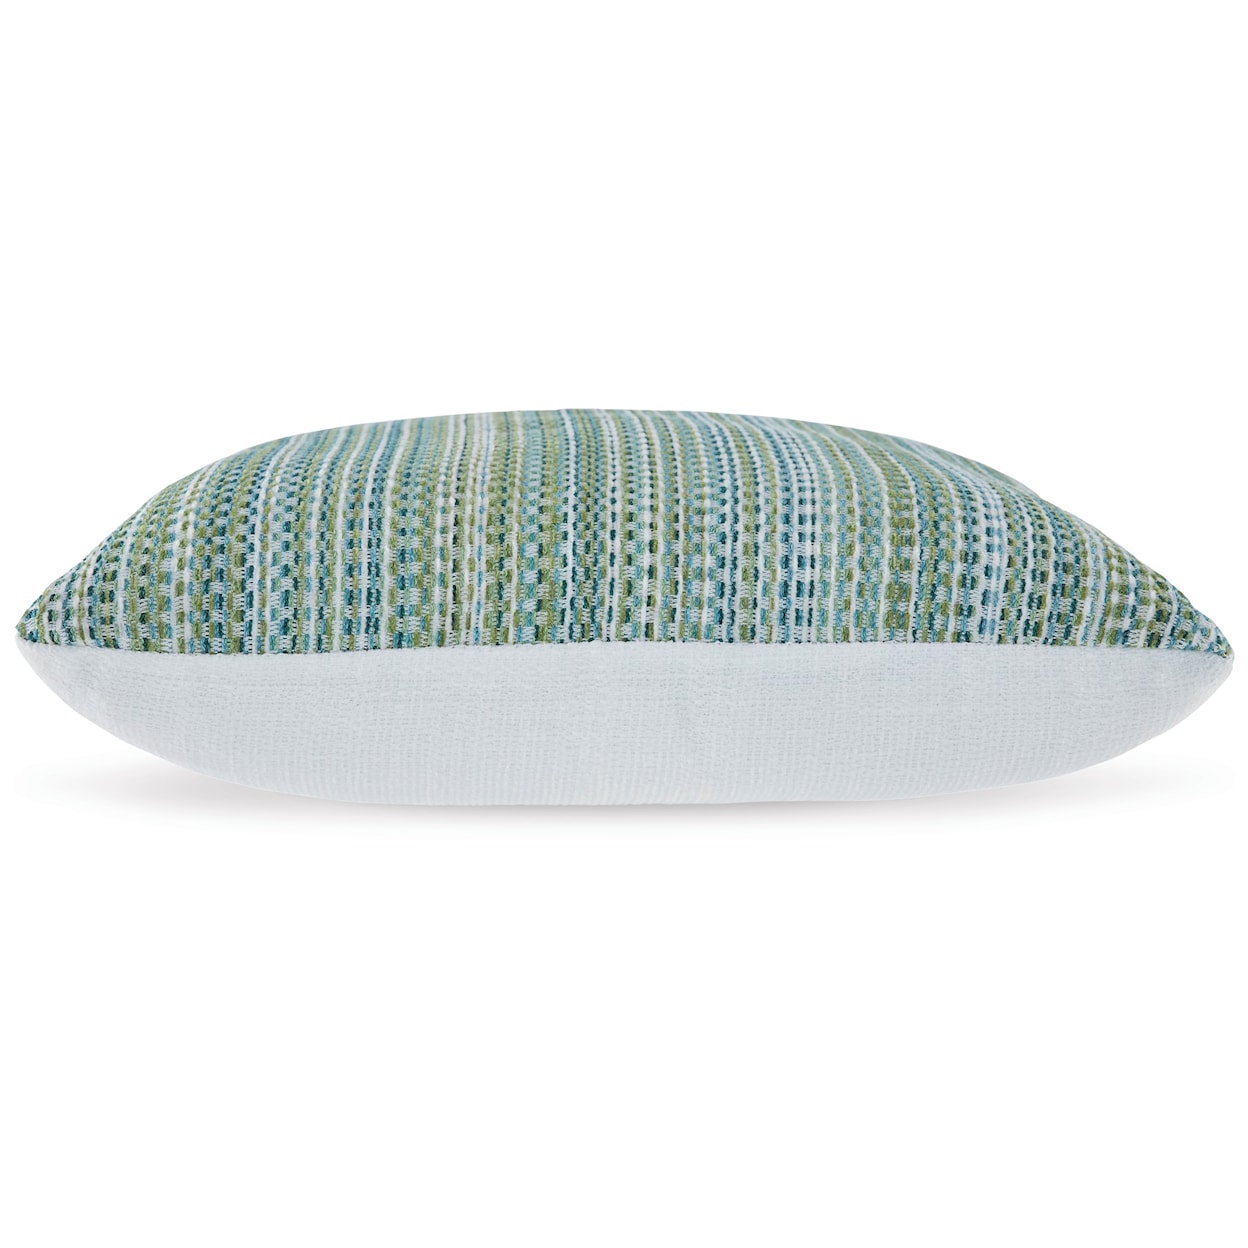 Signature Design by Ashley Keithley Next-Gen Nuvella Pillow (Set of 4)